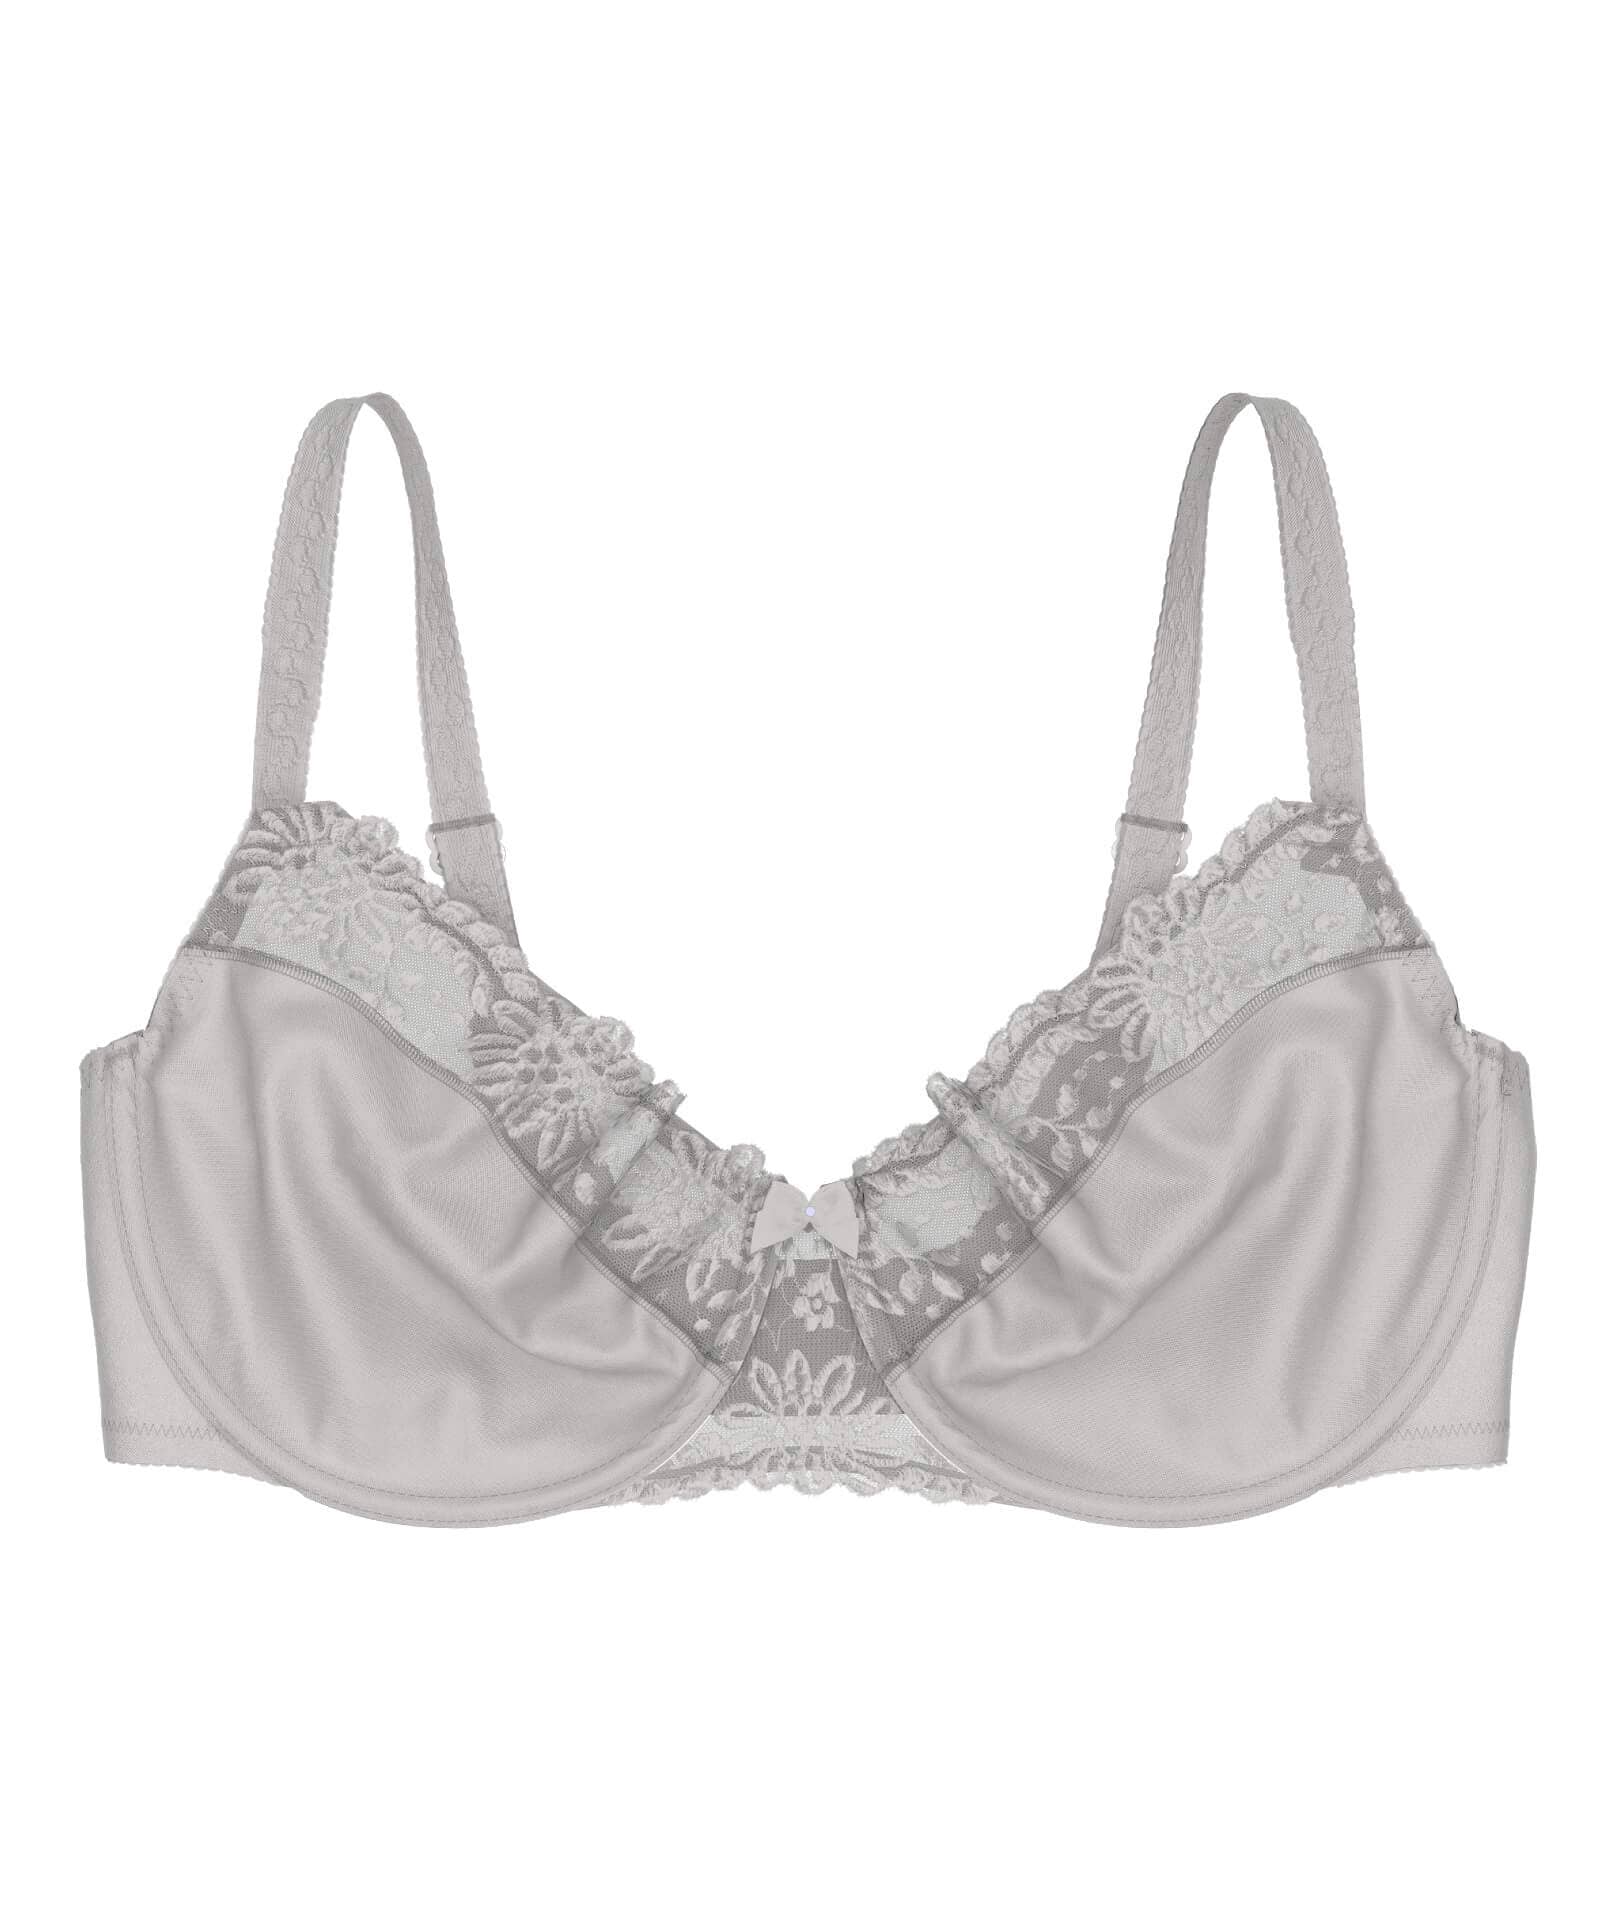 Buy Triumph Ladyform Soft Minimizer bra smooth skin from £38.56 (Today) –  Best Deals on